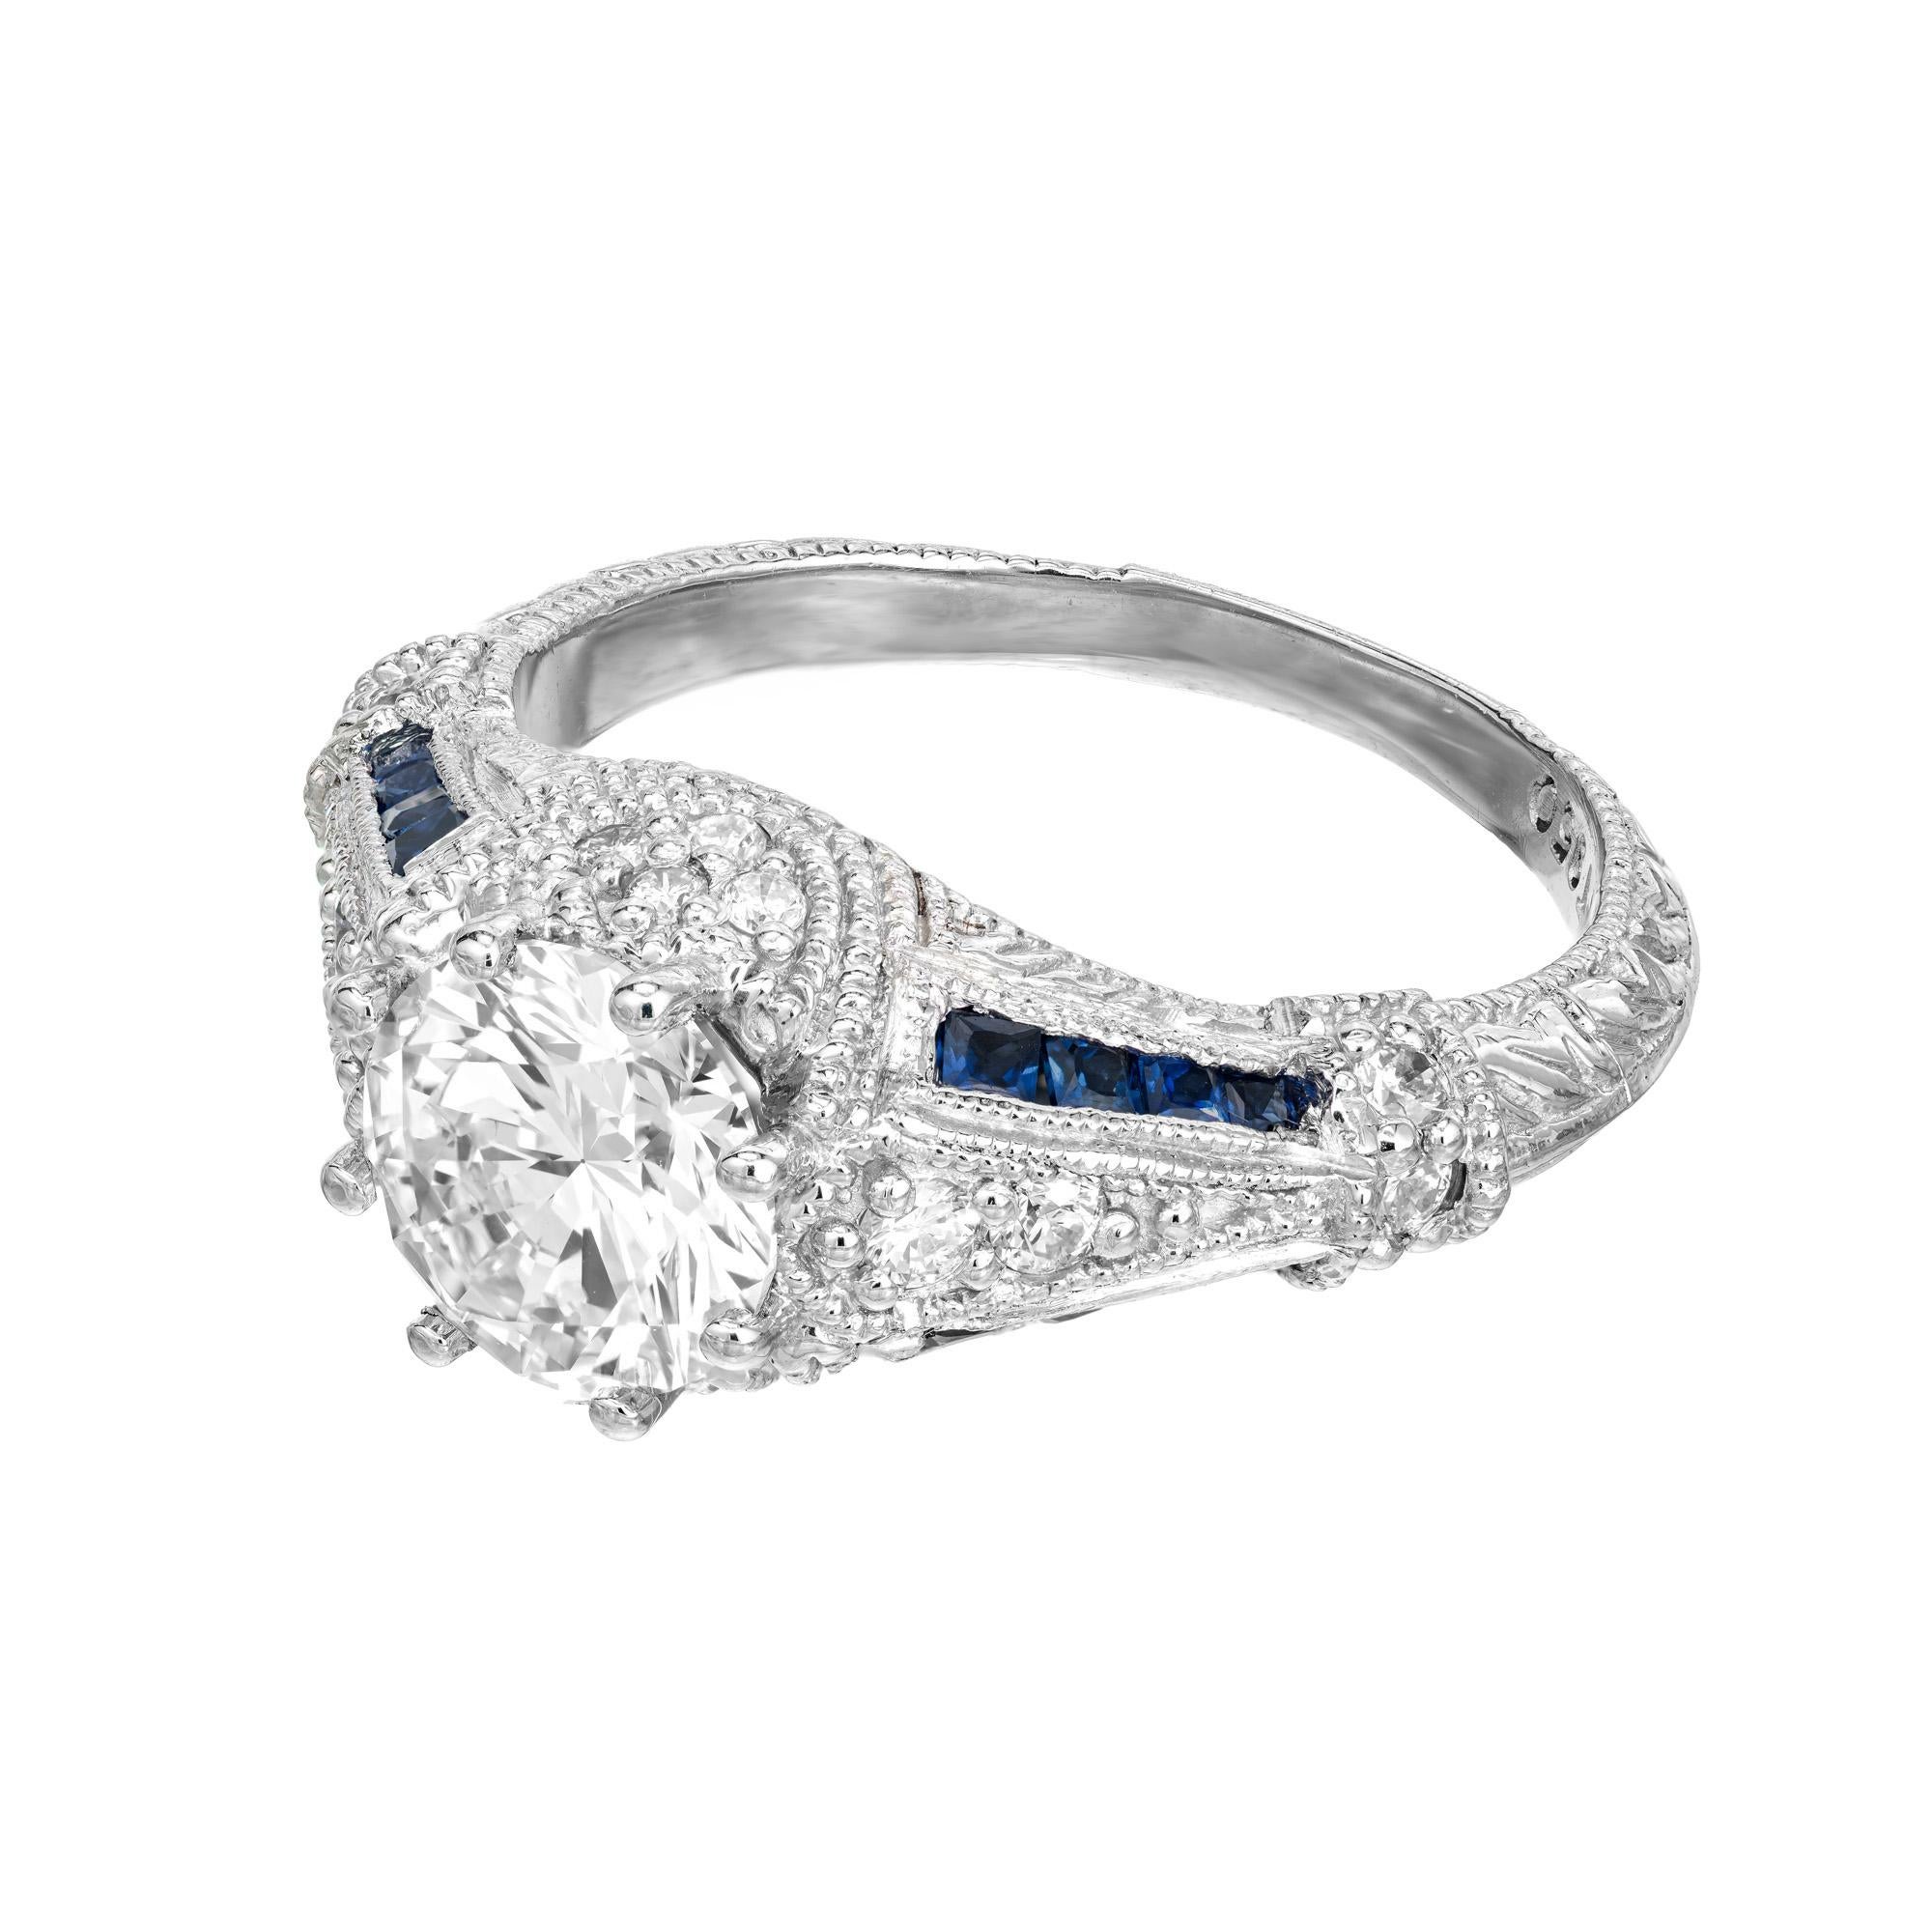 Diamond and sapphire engagement ring. GIA certified 1.51ct round brilliant cut center diamond, mounted in a platinum 8 prong setting. This ring is highly detailed, accented with 18 full cut round dimaonds and two rows of square cut sapphires along